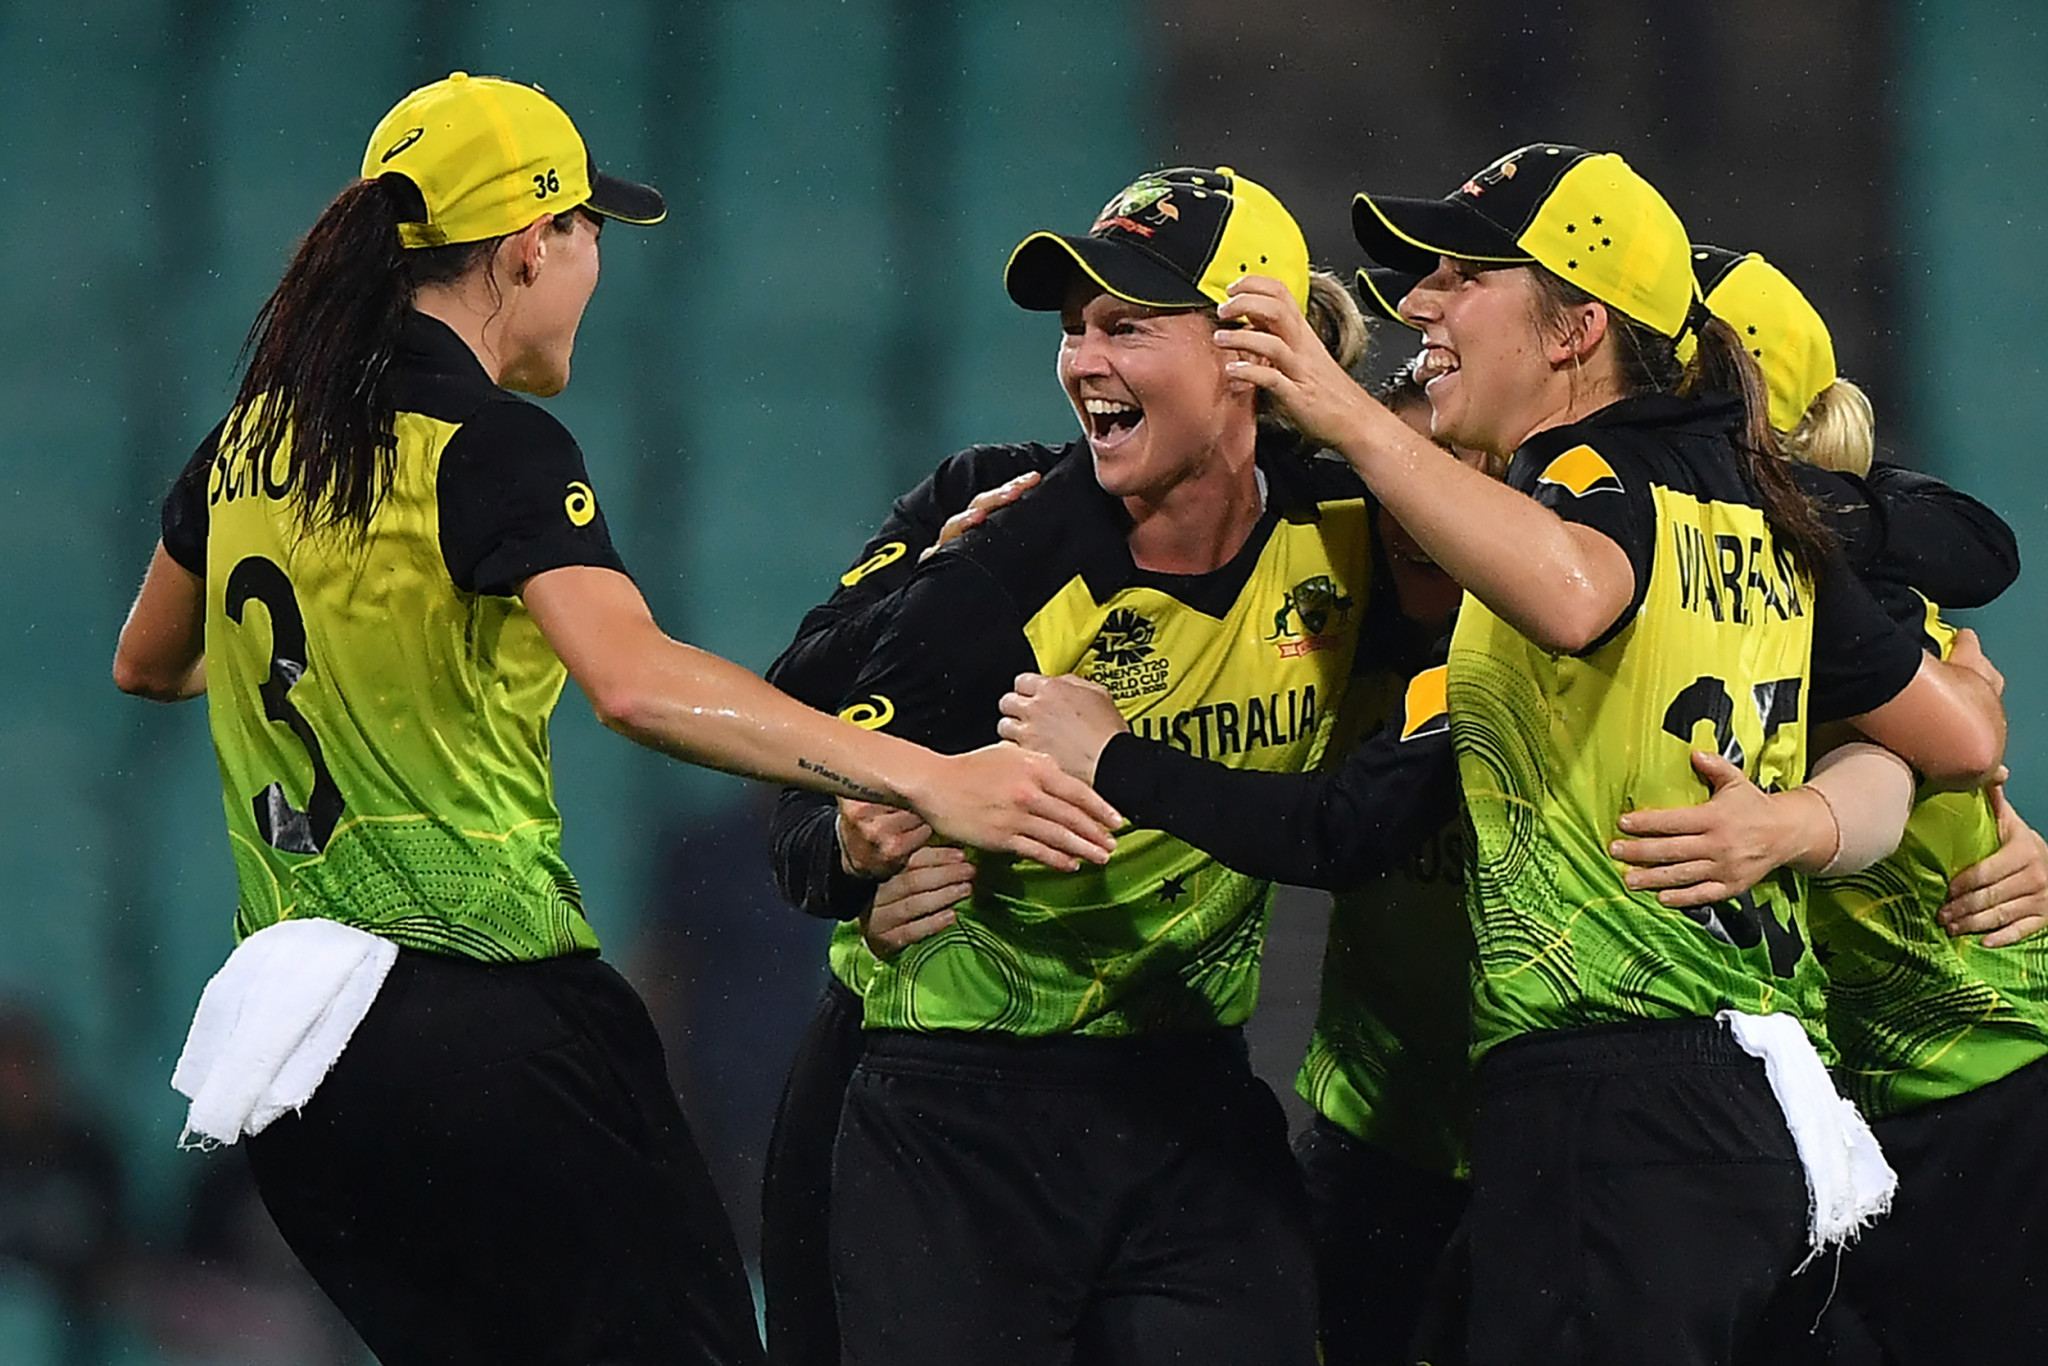 The men's T20 World Cup is set to follow on from the women's edition which took place in February and March ©Getty Images